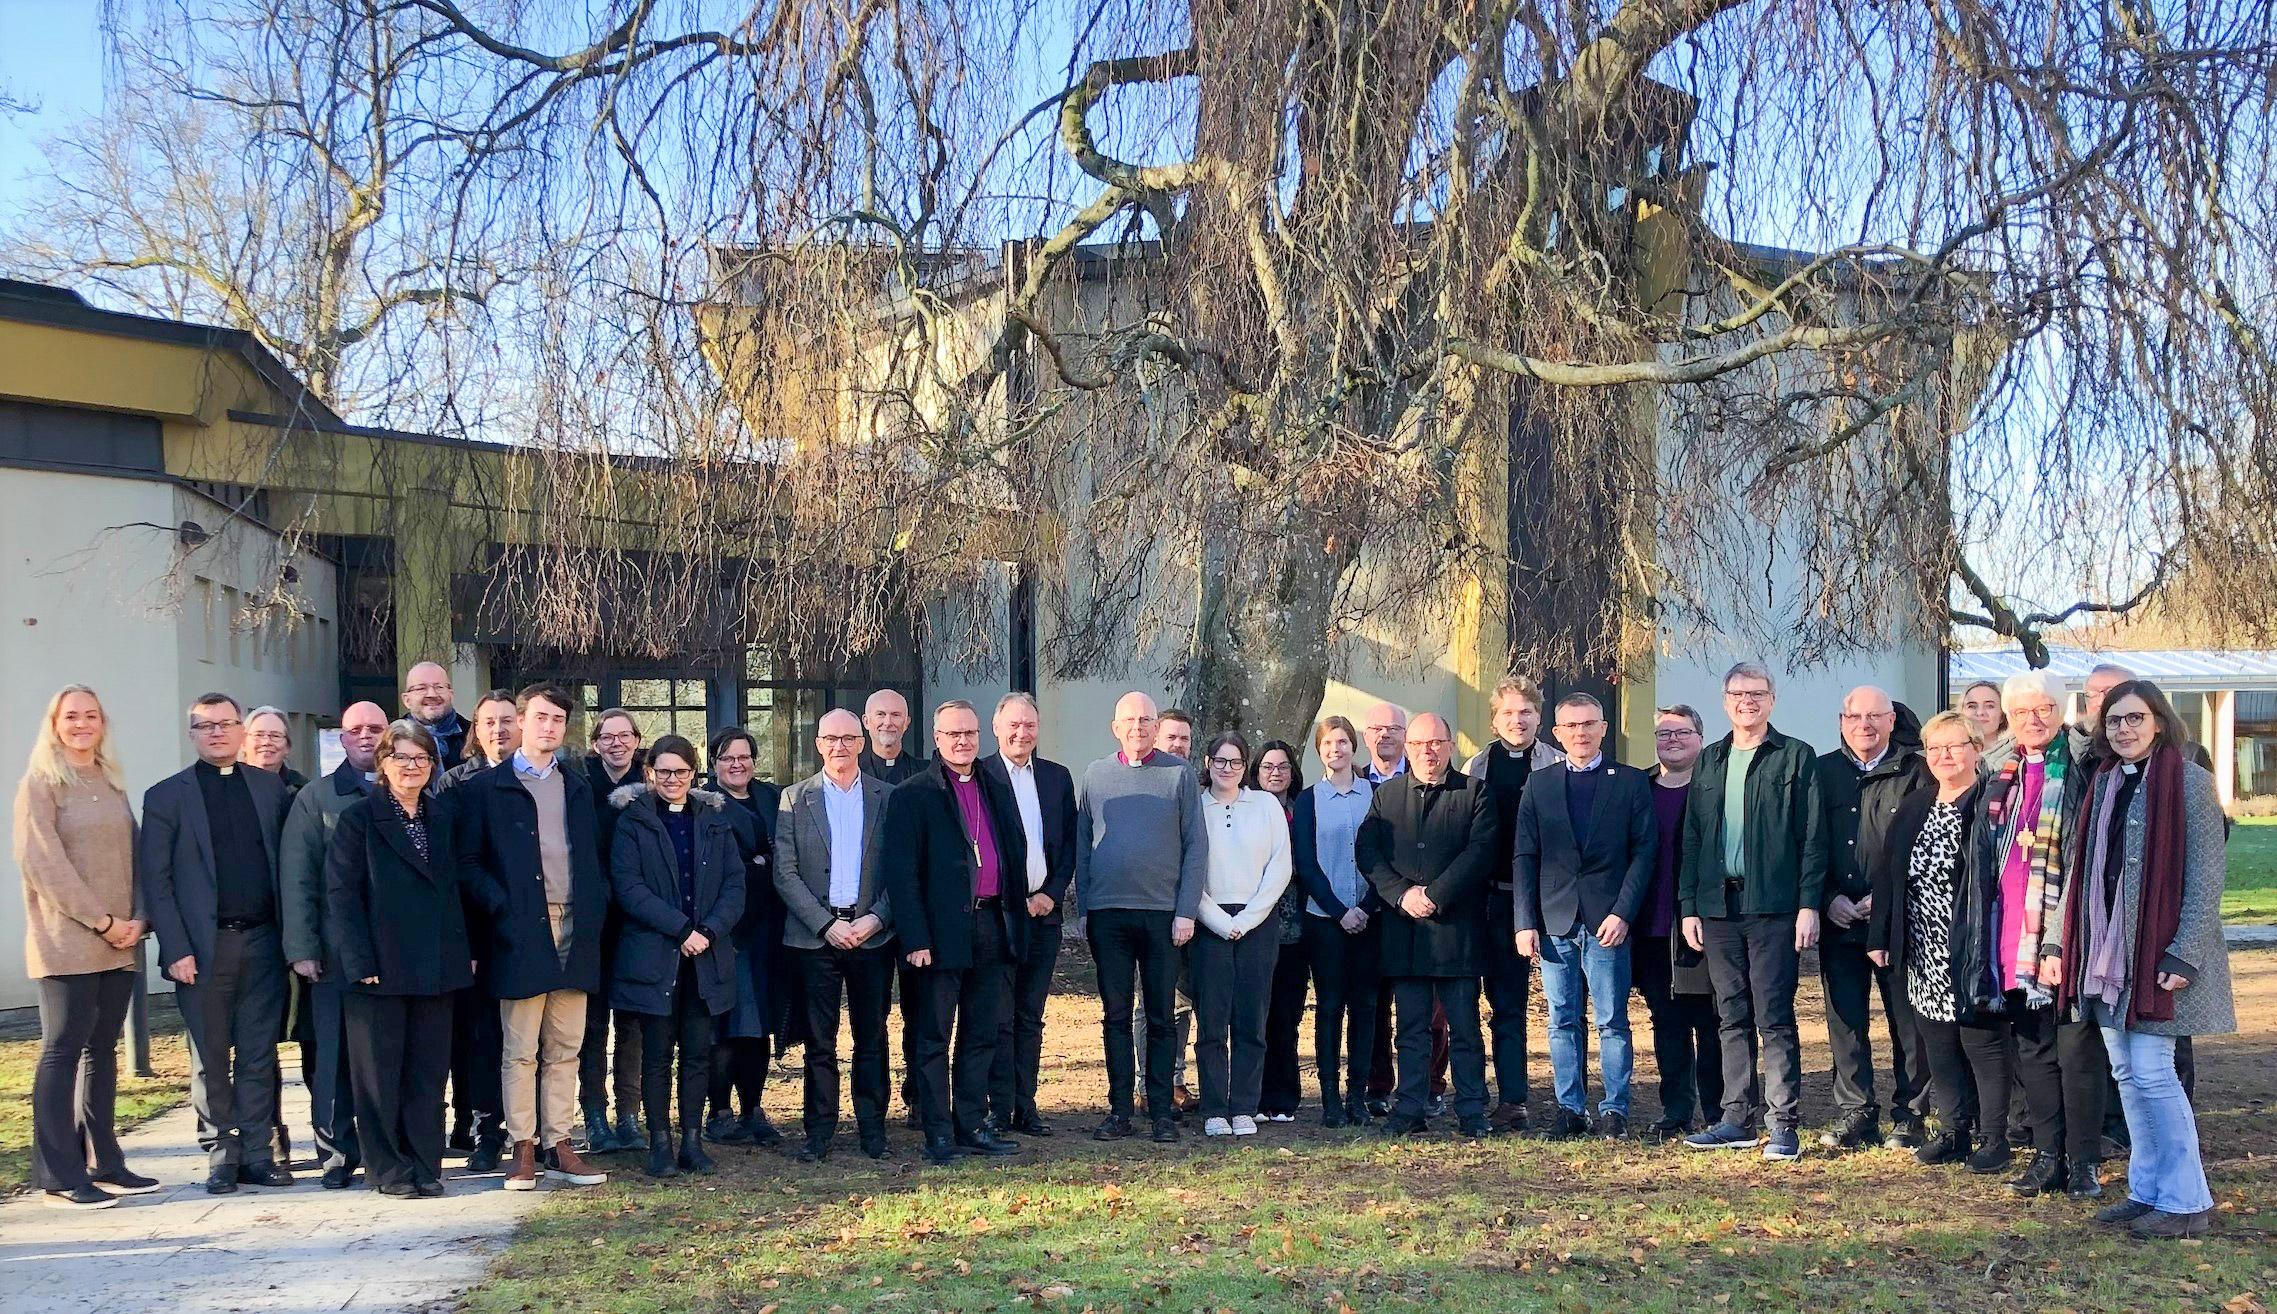 Delegates from the Nordic churches gather in Höör for a preparatory meeting looking ahead to the LWF Assembly in Krakow in September. Photo: LWF/I. Lukas